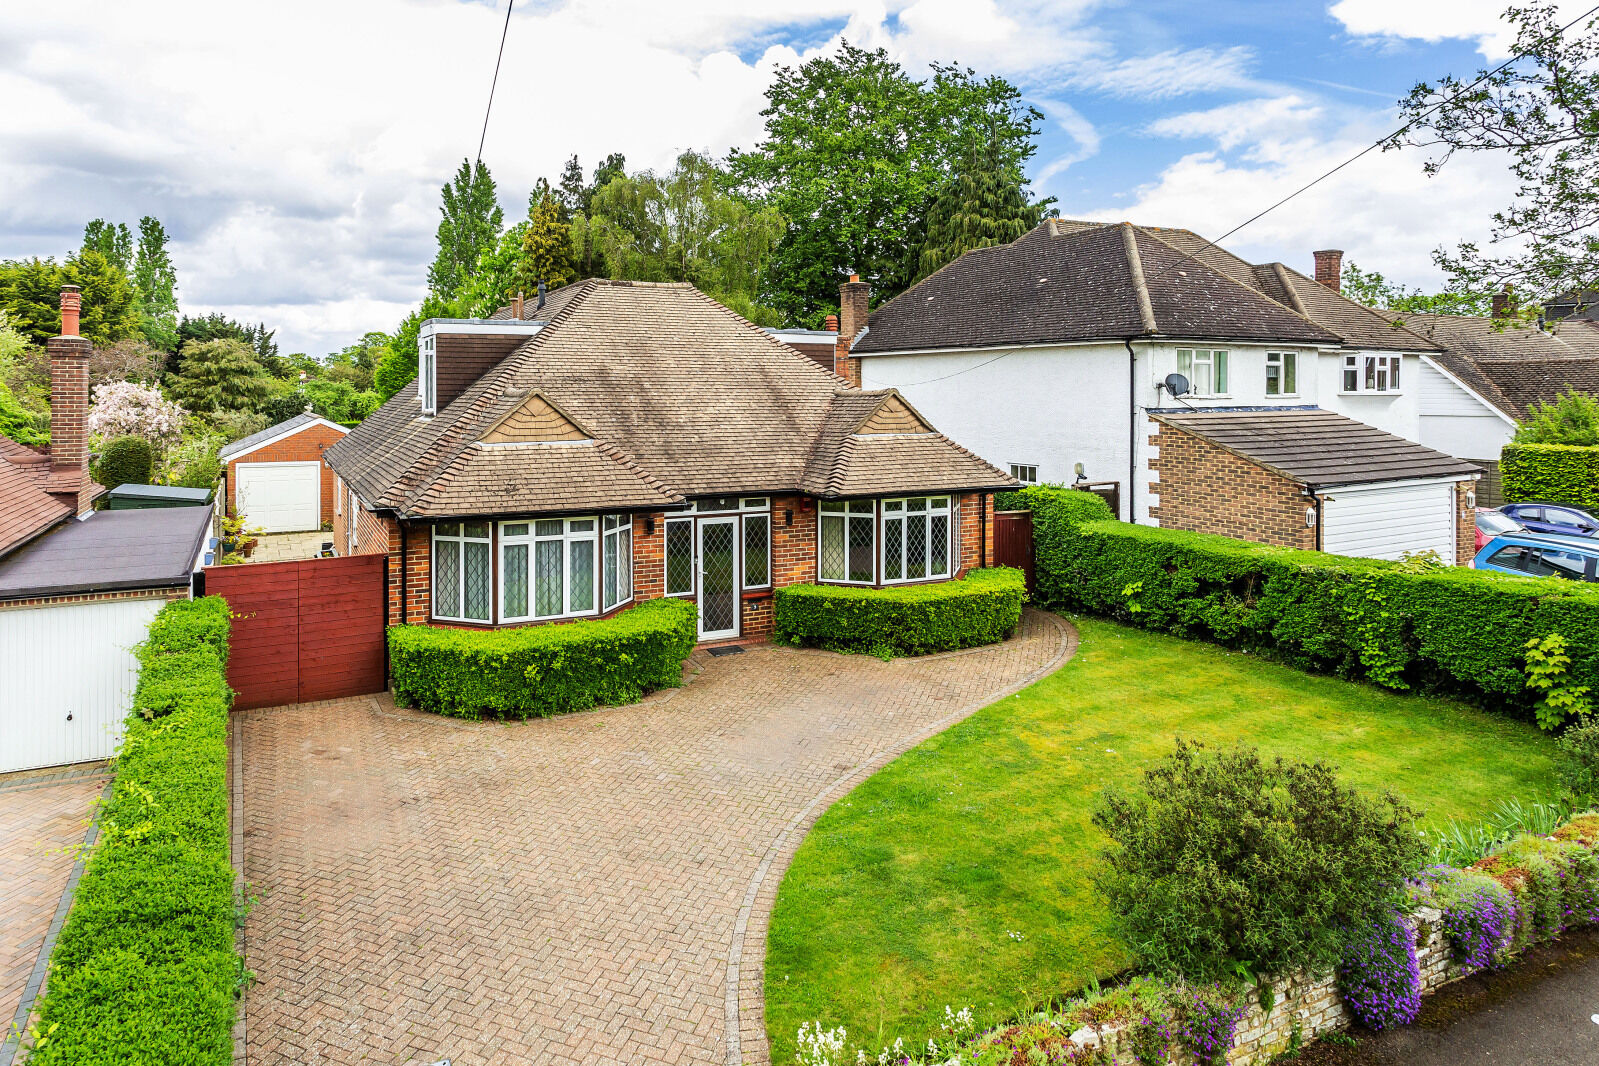 4 bedroom detached house for sale The Linkway, South Sutton, SM2, main image